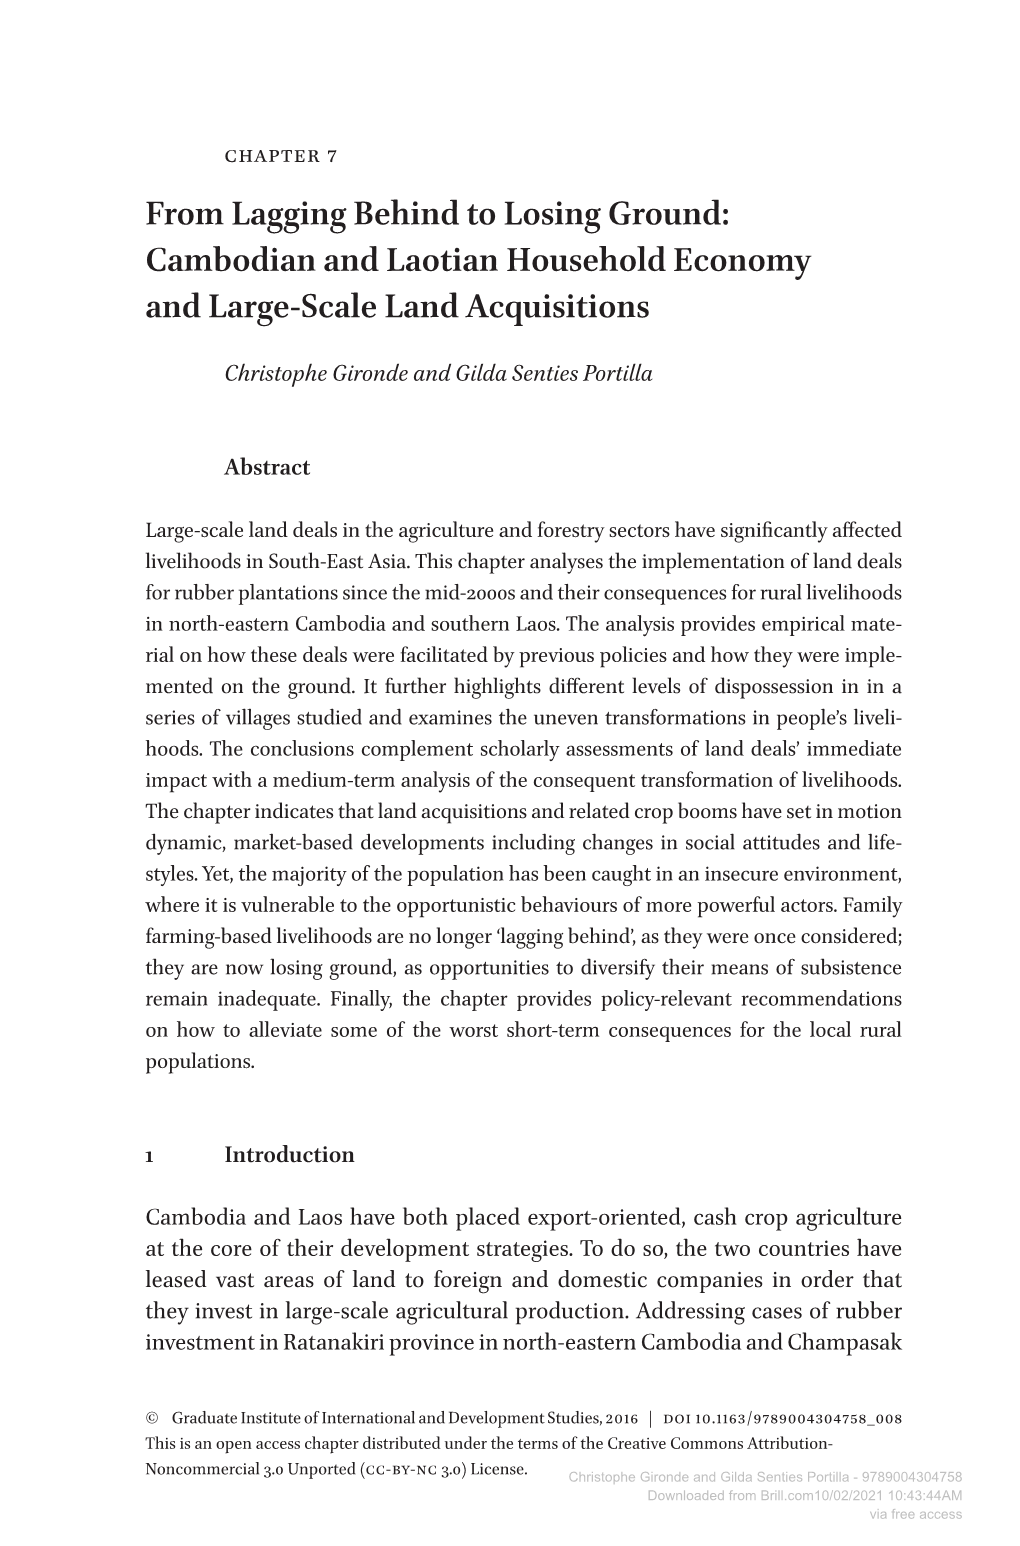 From Lagging Behind to Losing Ground: Cambodian and Laotian Household Economy and Large-Scale Land Acquisitions